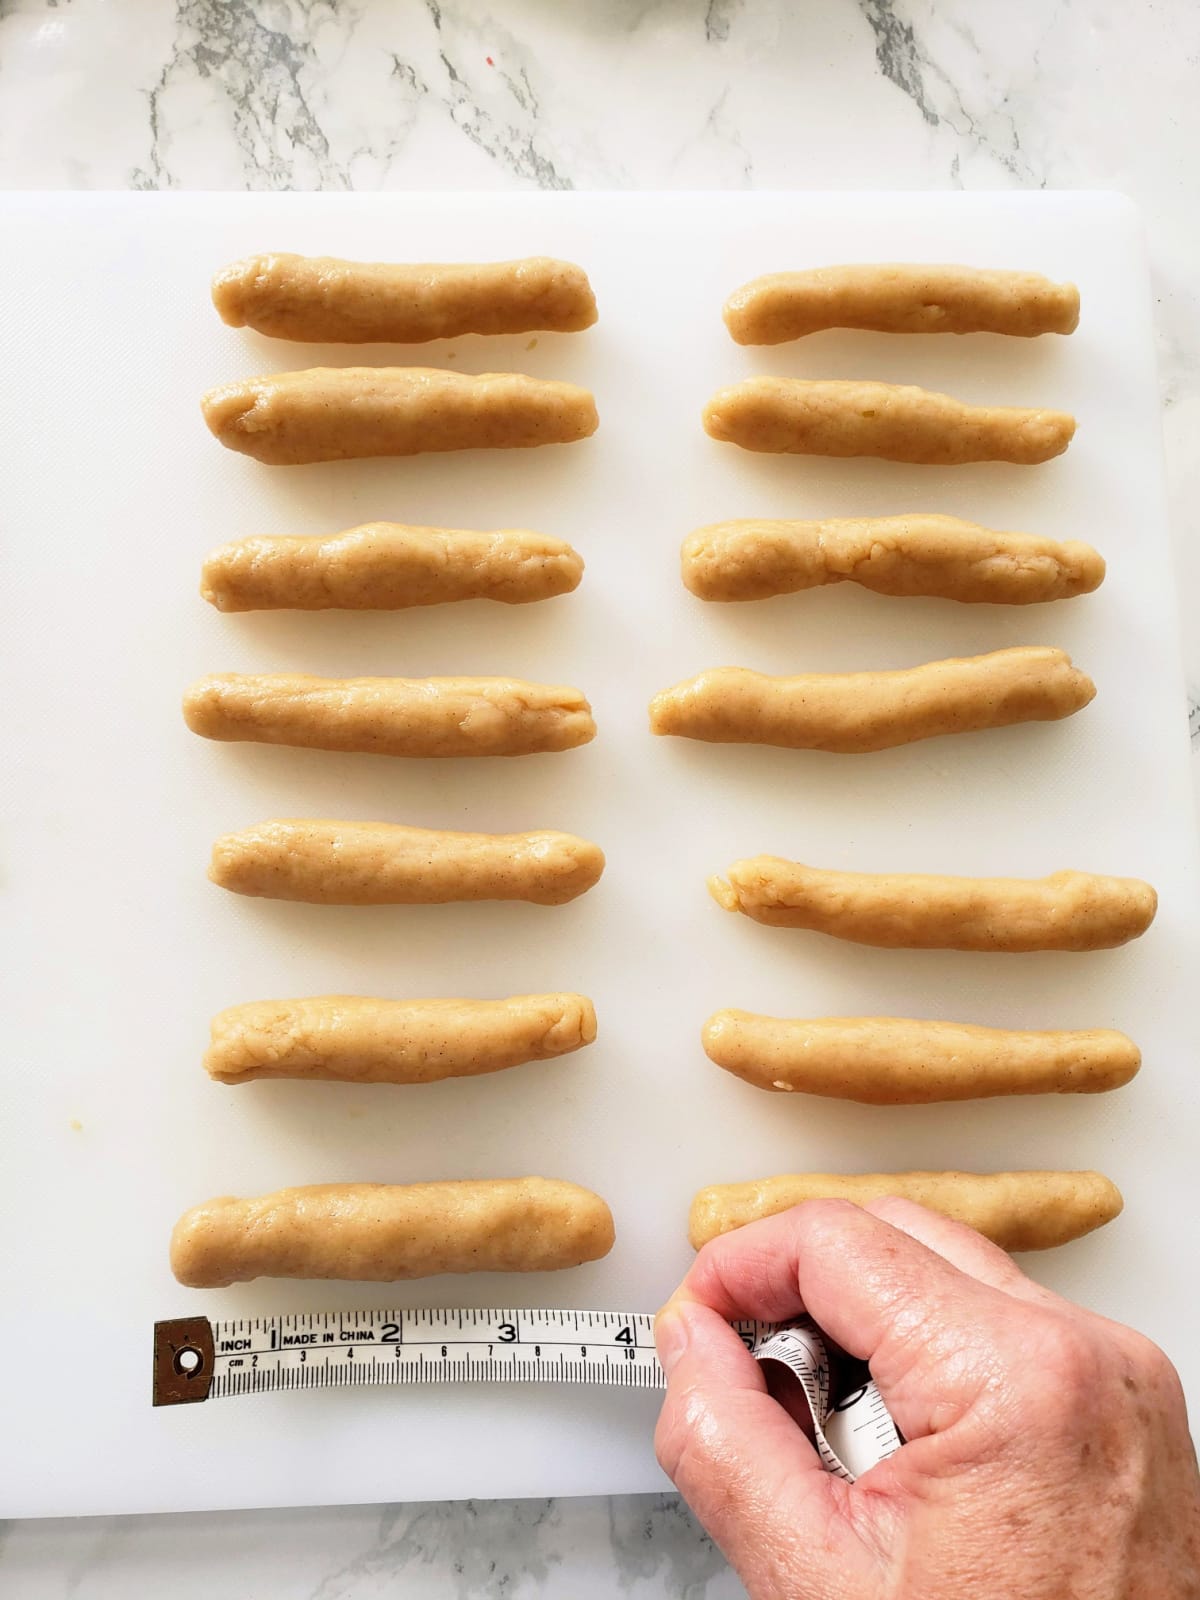 2 columns of 7 cylinders of rolled cookie dough on a white cutting board, with a hand holding a measuring tape to measure their length